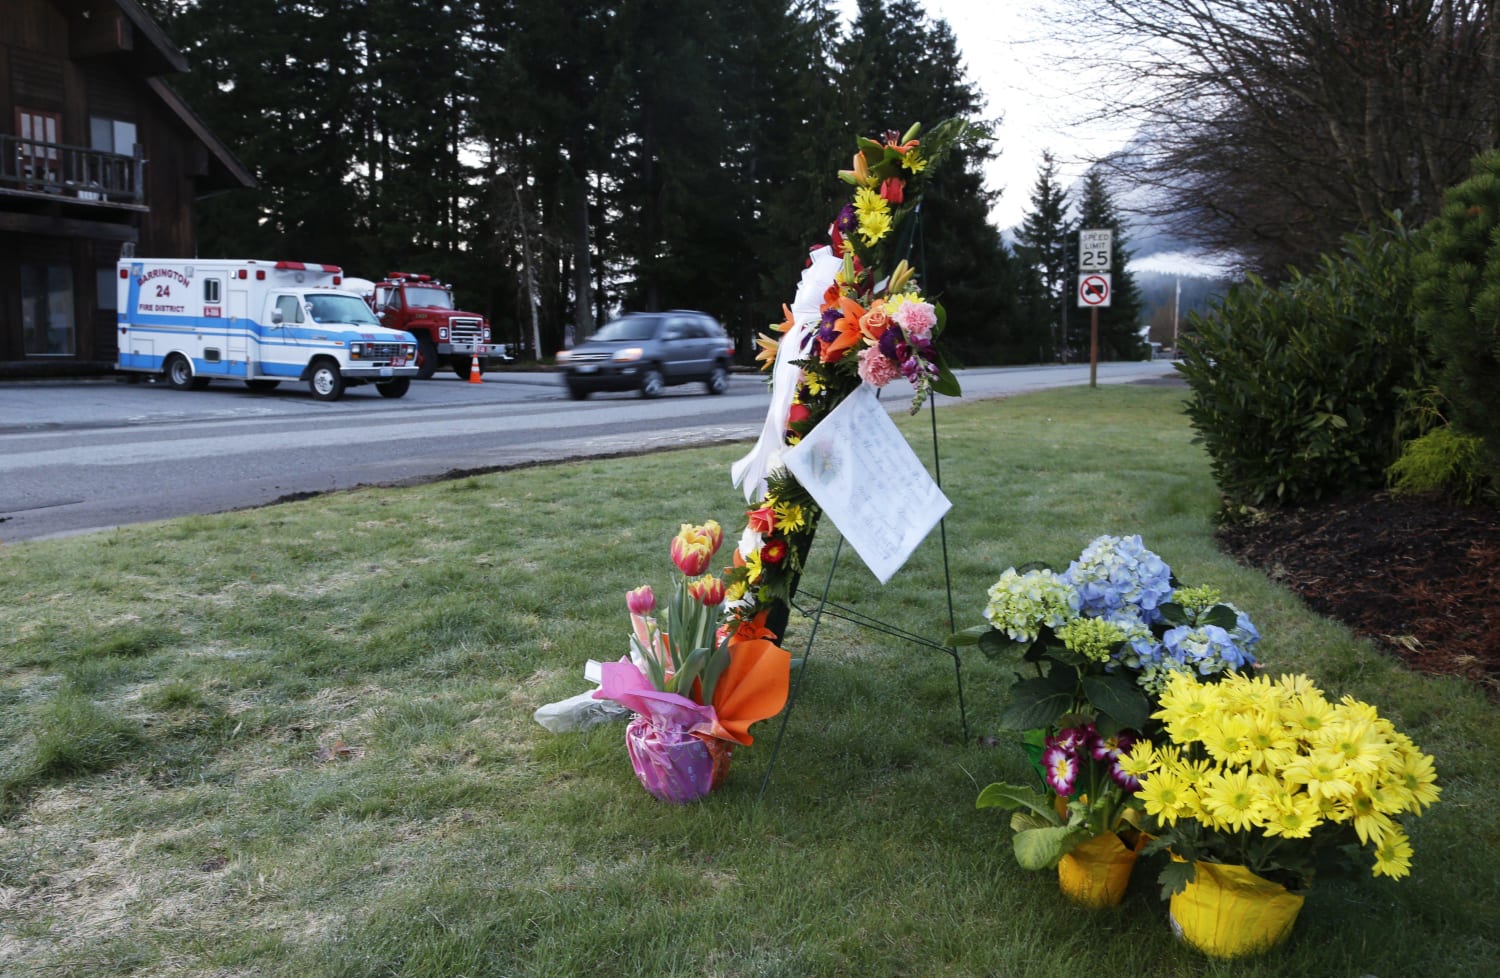 Funeral Home Near Washington Mudslide Copes with Burying More Dead - NBC News